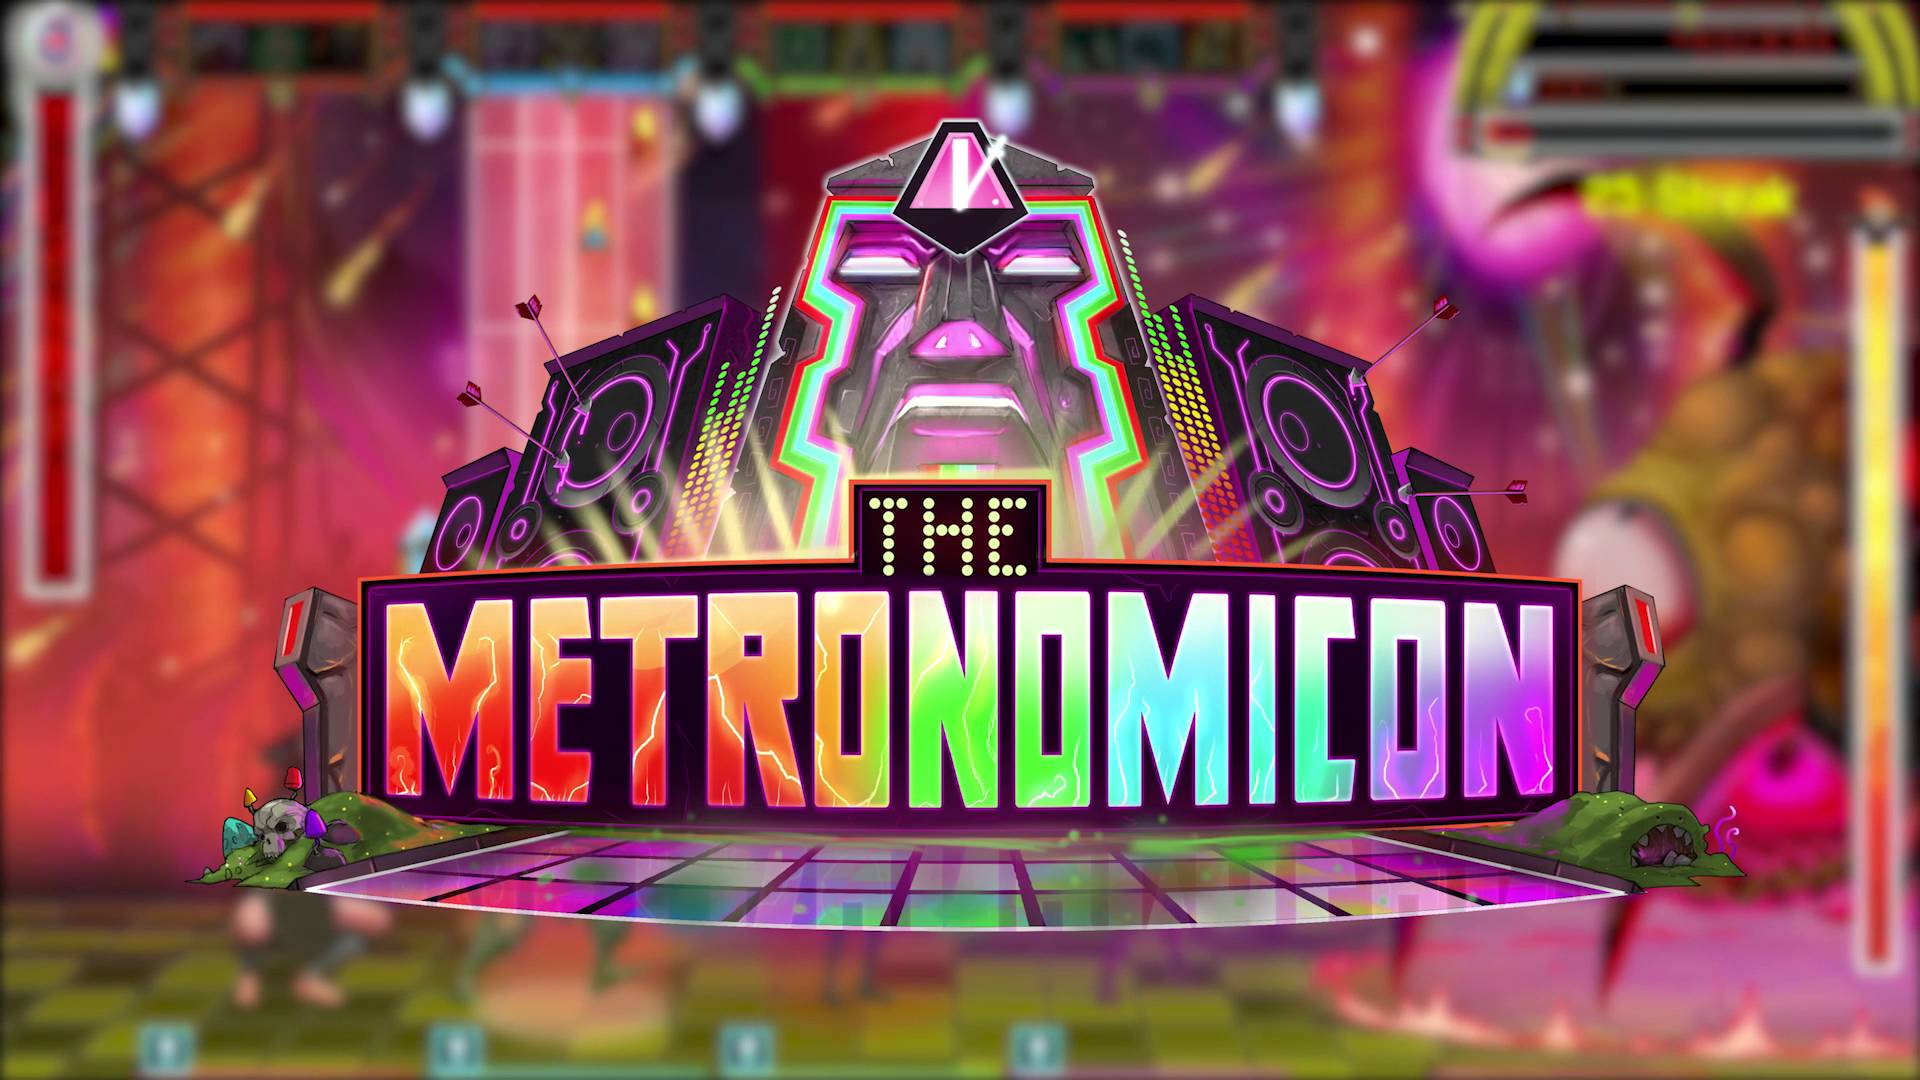 The Metronomicon instaling